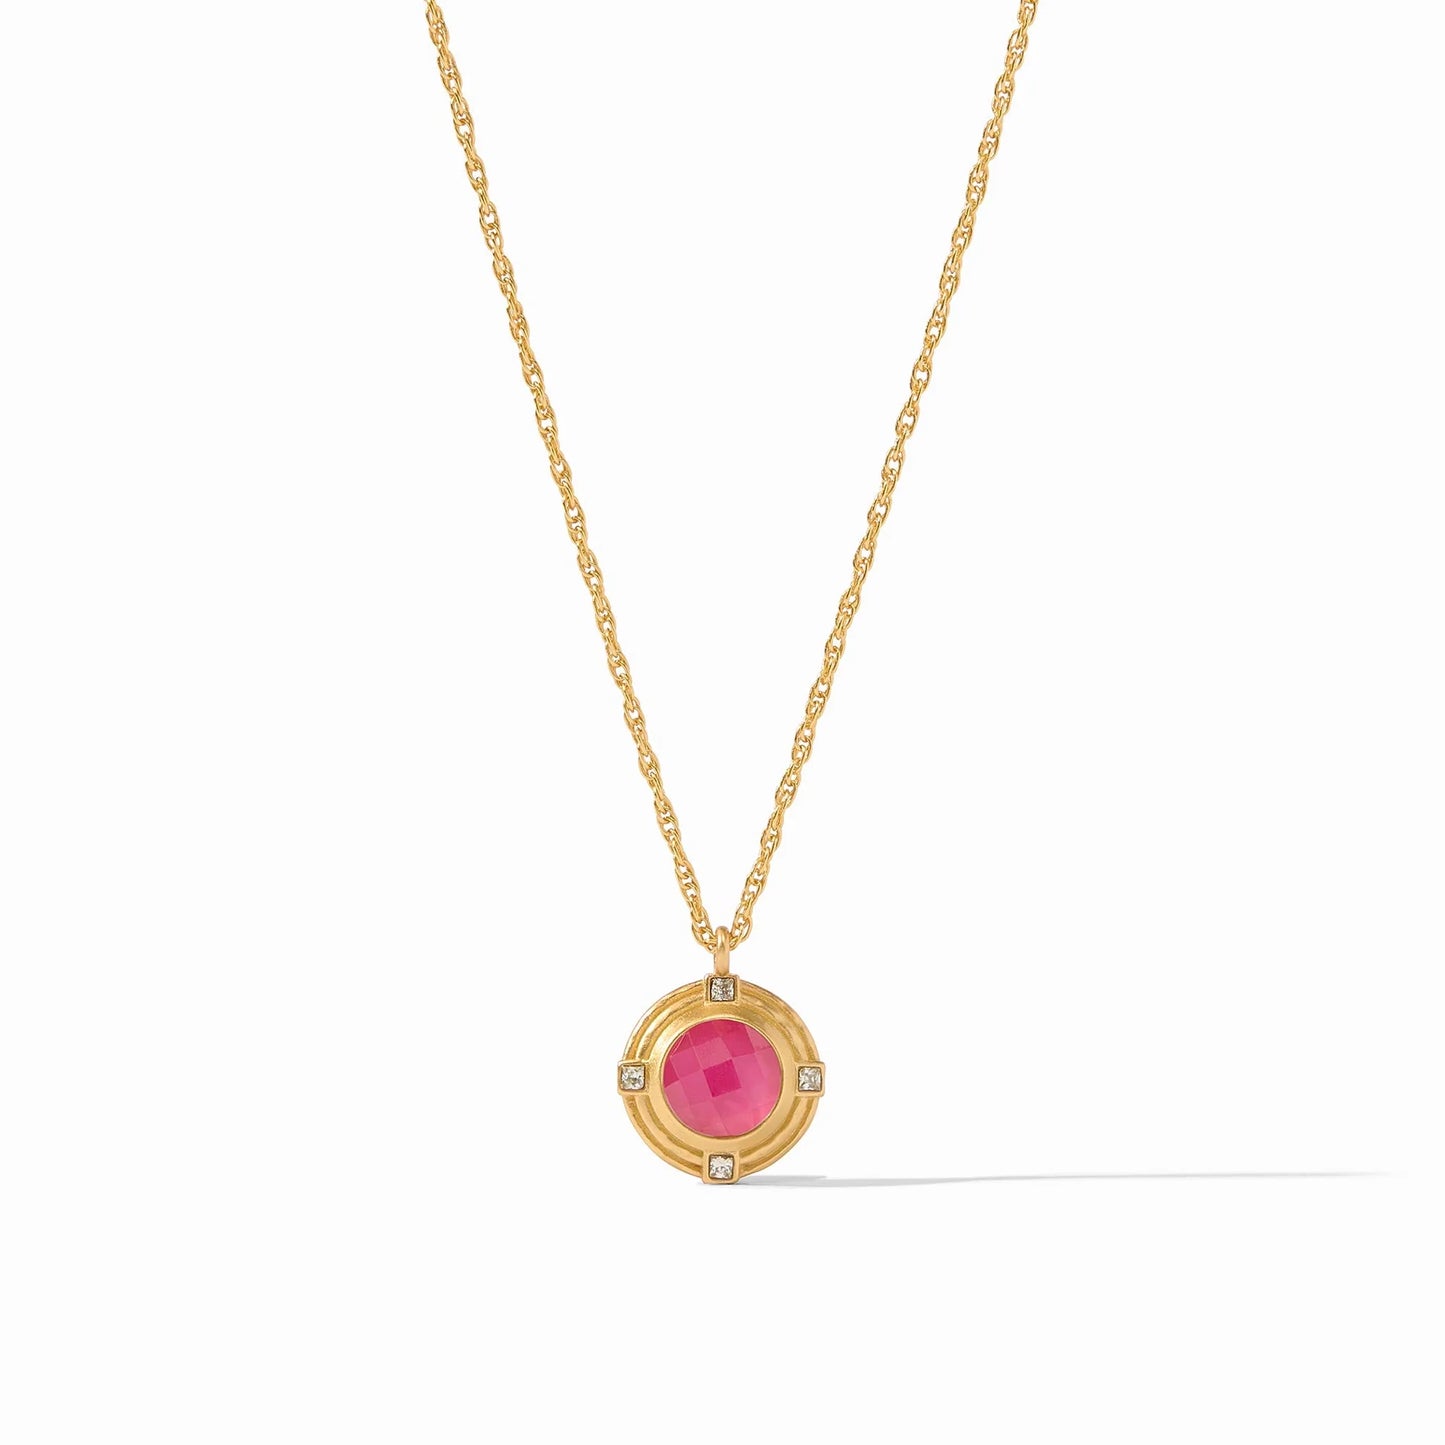 Astor Solitaire Necklace - Iridescent Raspberry by Julie Voss. This solitaire necklace features a rose cut stone set with princess cut CZs on one side and a quatrefoil coin on the reverse, dangling from a delicate rope chain. 17 - 18 inches 24K gold plate. Shop at The Painted Cottage an Annapolis boutique.